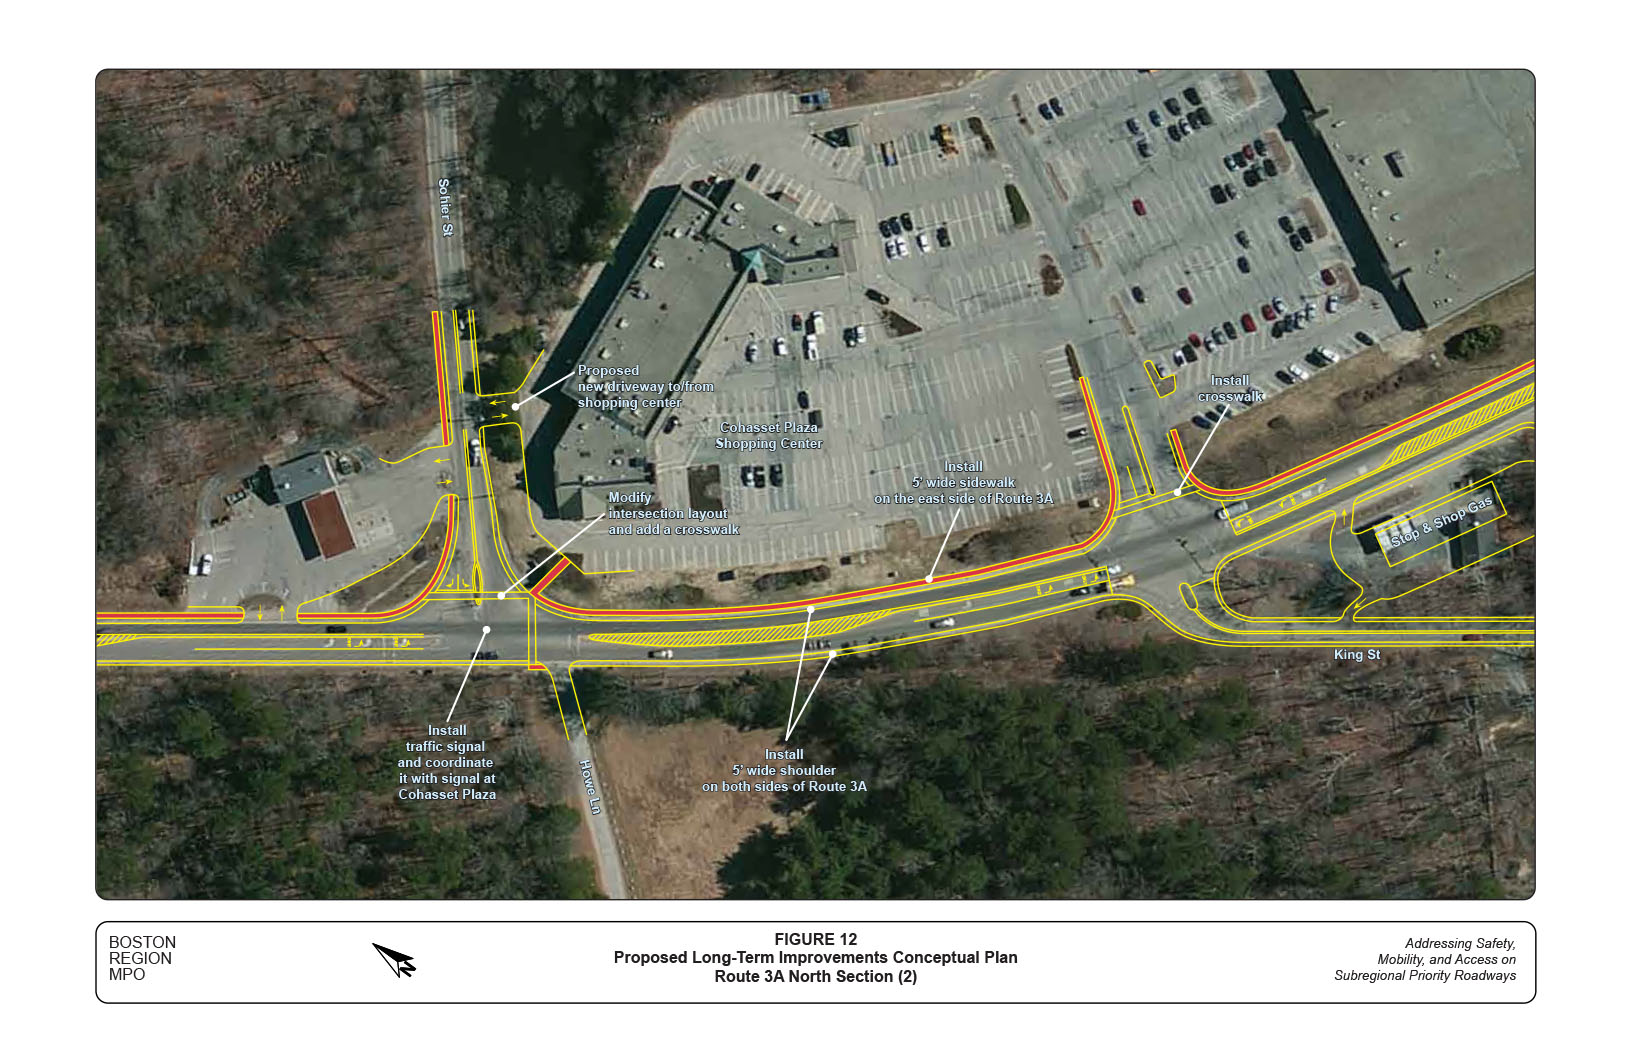 FIGURE 12 is an aerial view map that depicts further proposed long-term improvements (conceptual plan) for the north section of Route 3A.